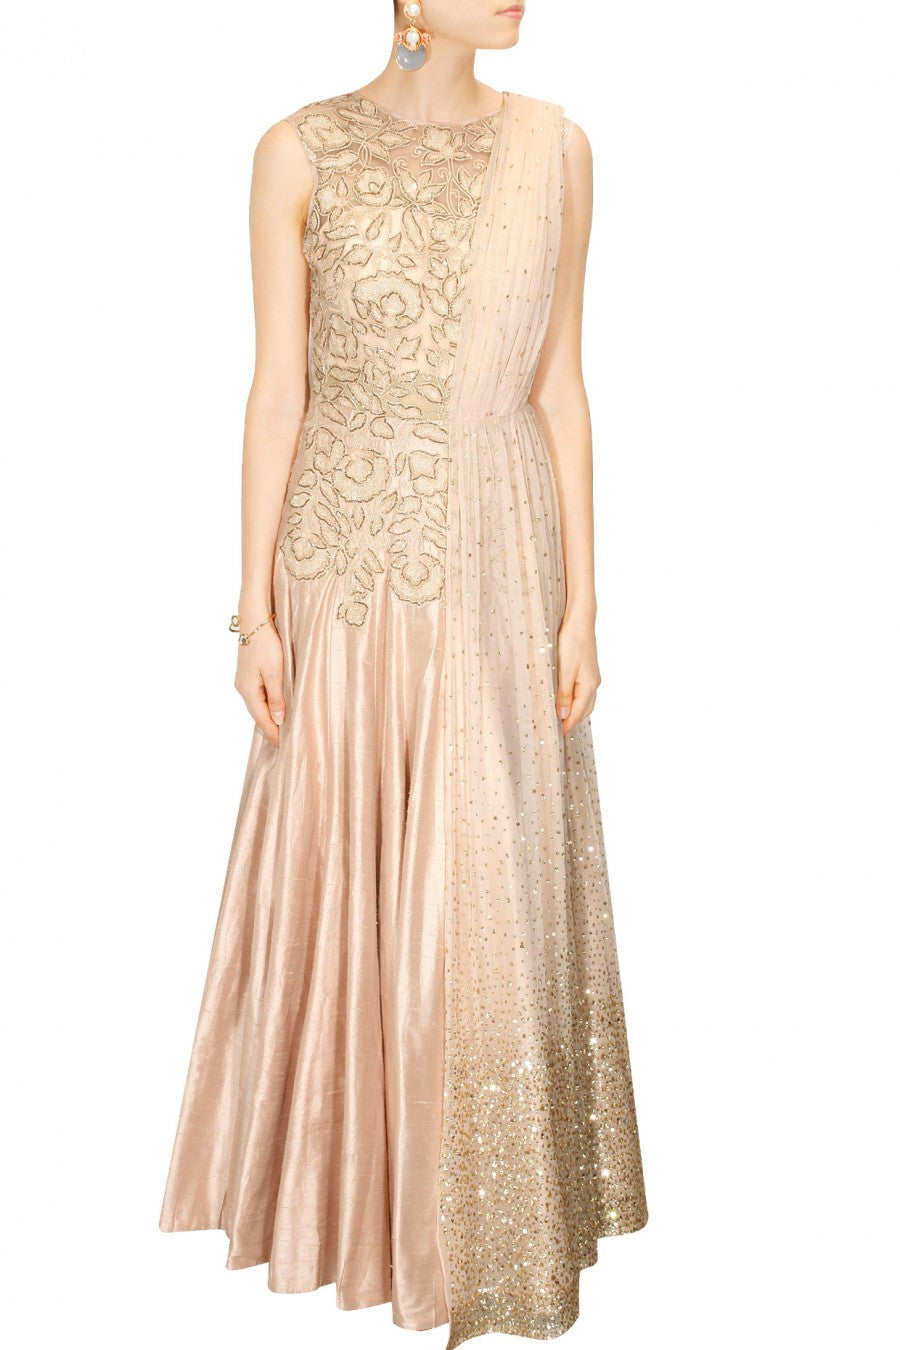 Hand Embroidered Art Silk Gown with Attached Dupatta in Peach : TUY205